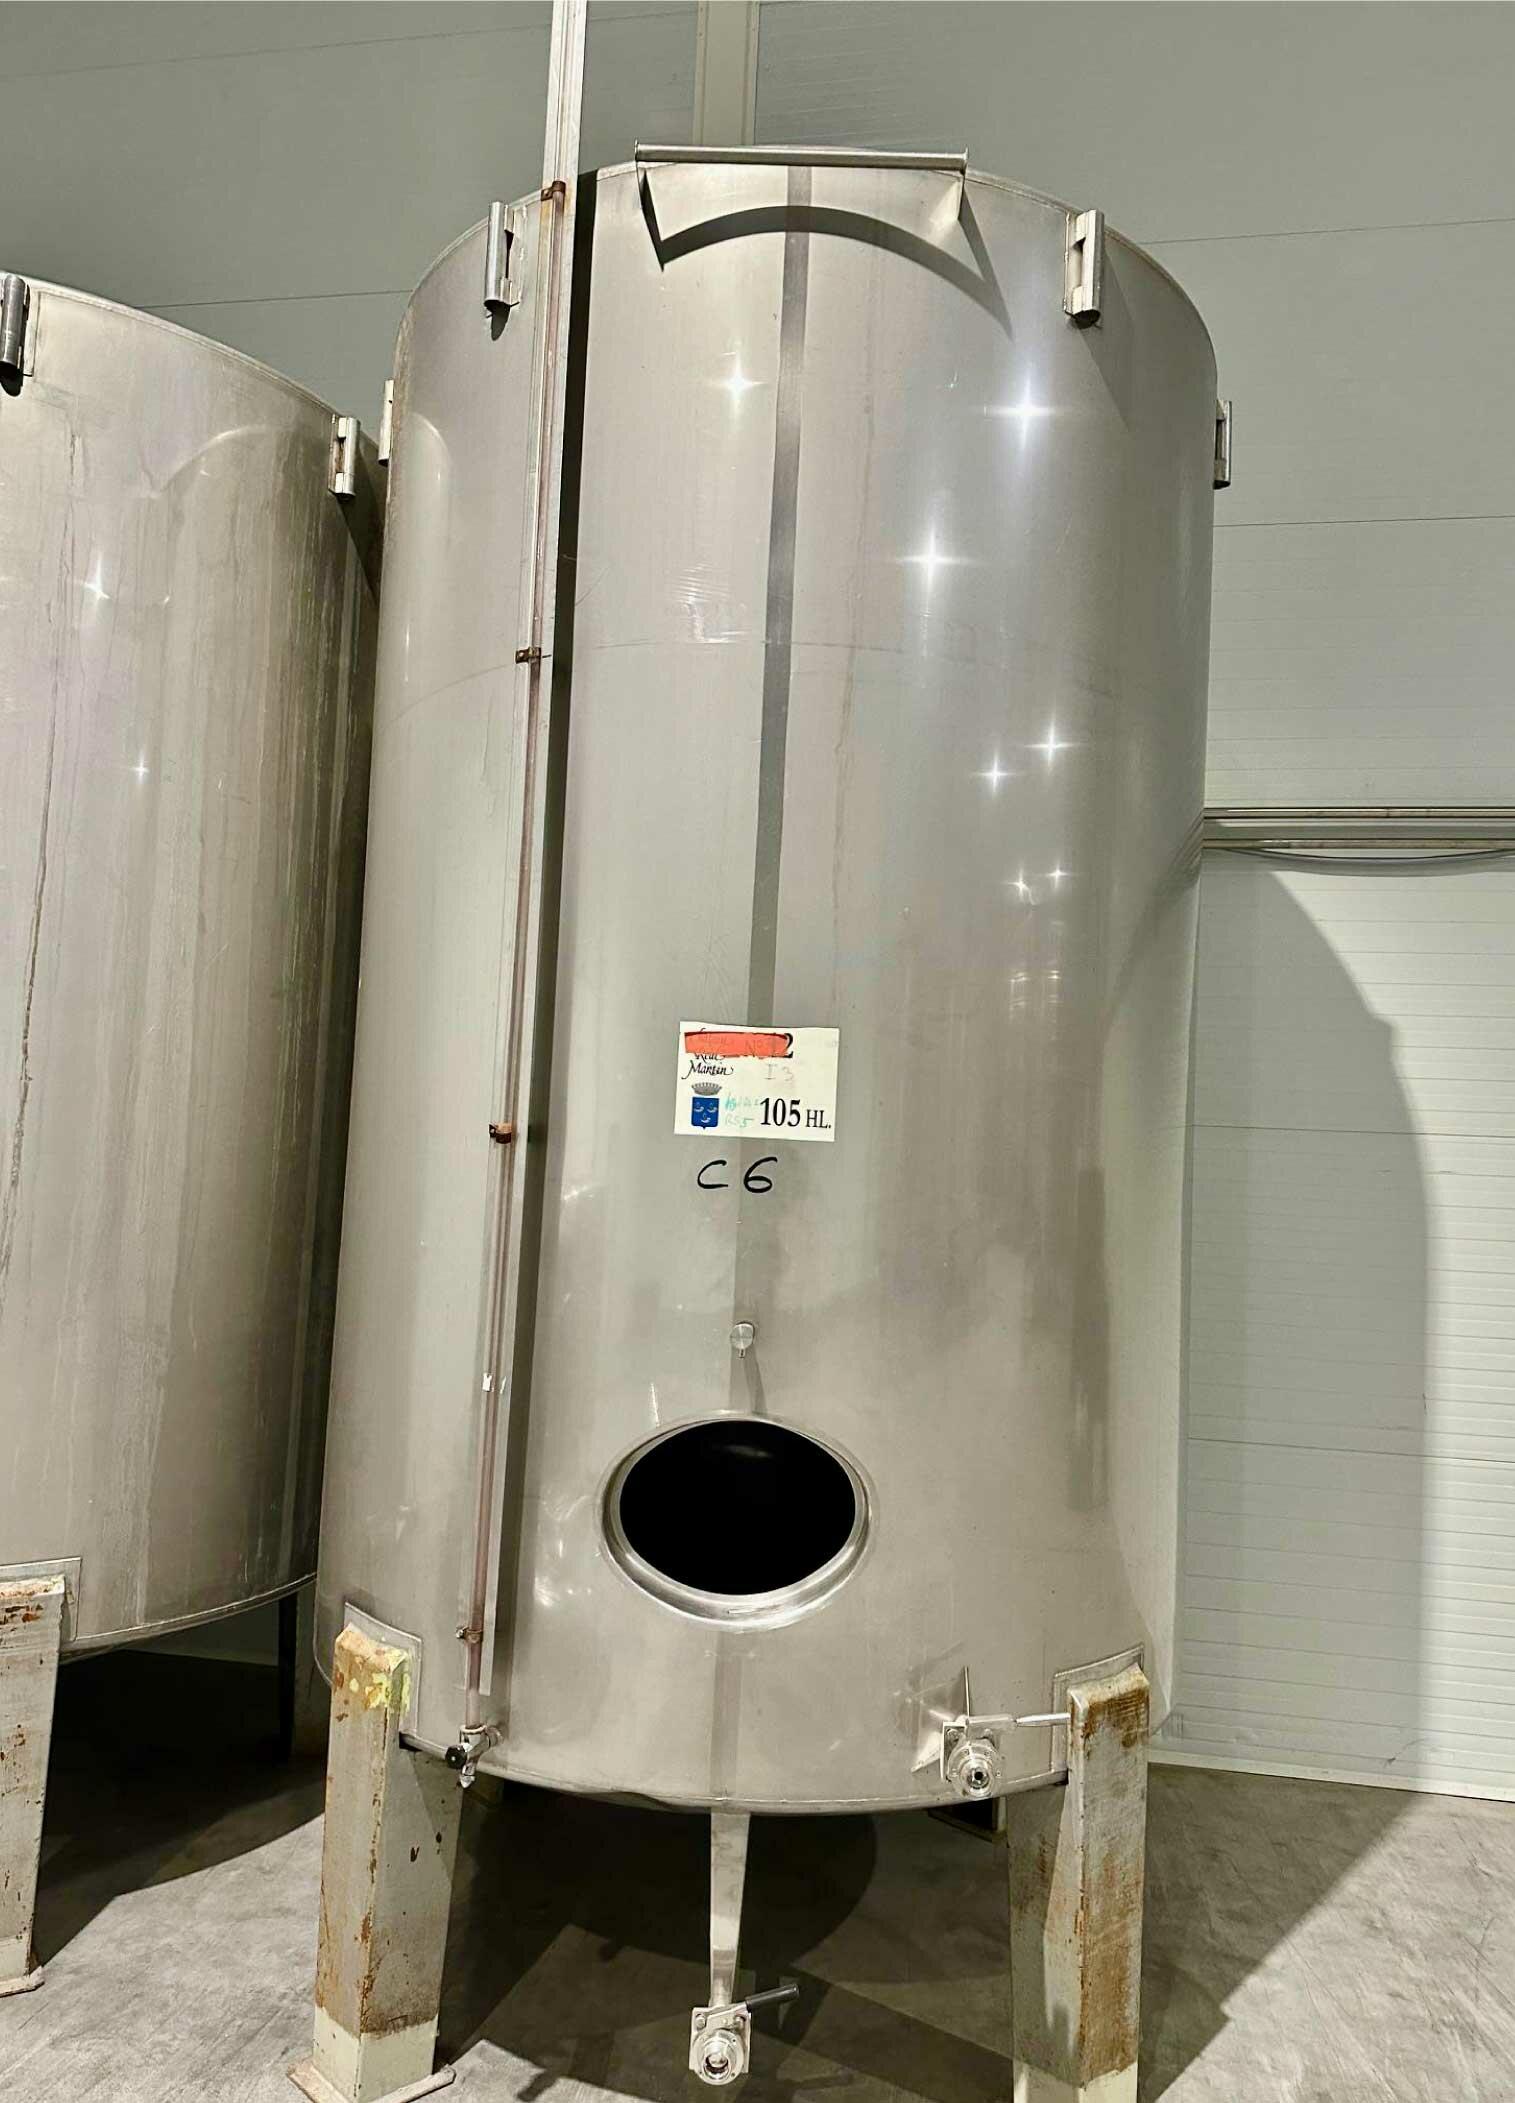 304 stainless steel tank - Conical base on feet